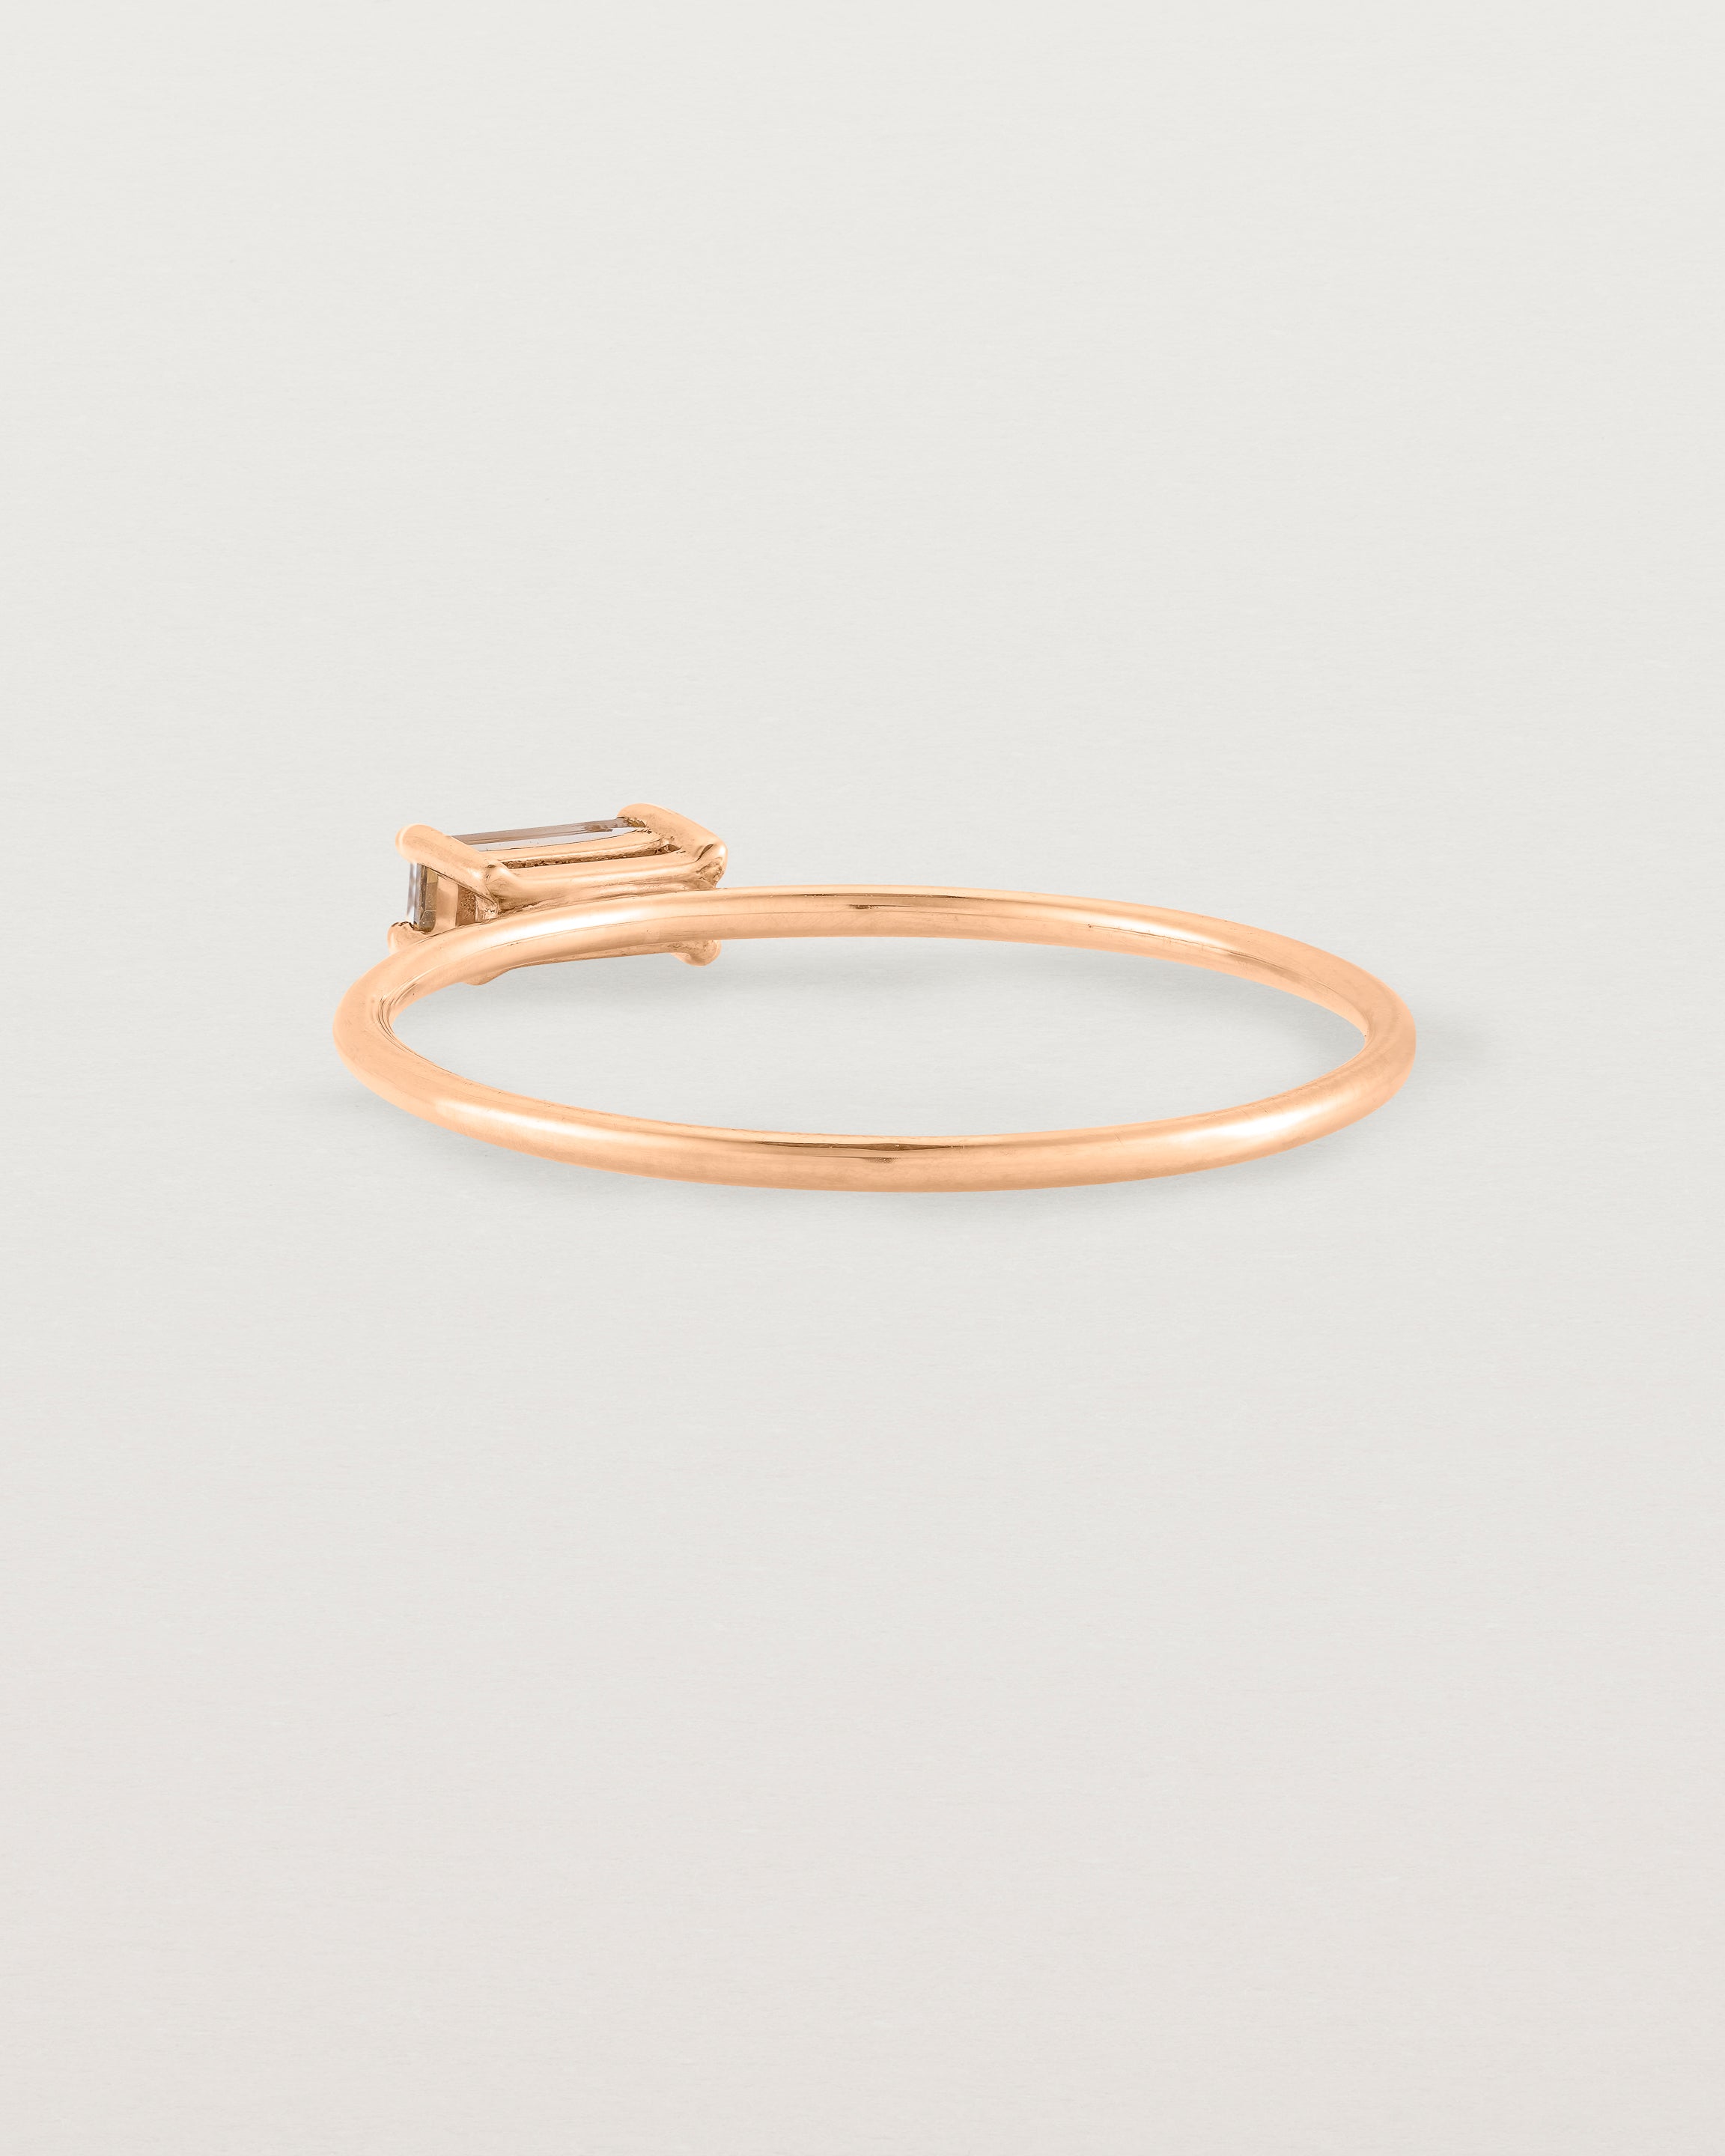 Back view of the Horizontal Baguette Ring | Smokey Quartz in Rose Gold.